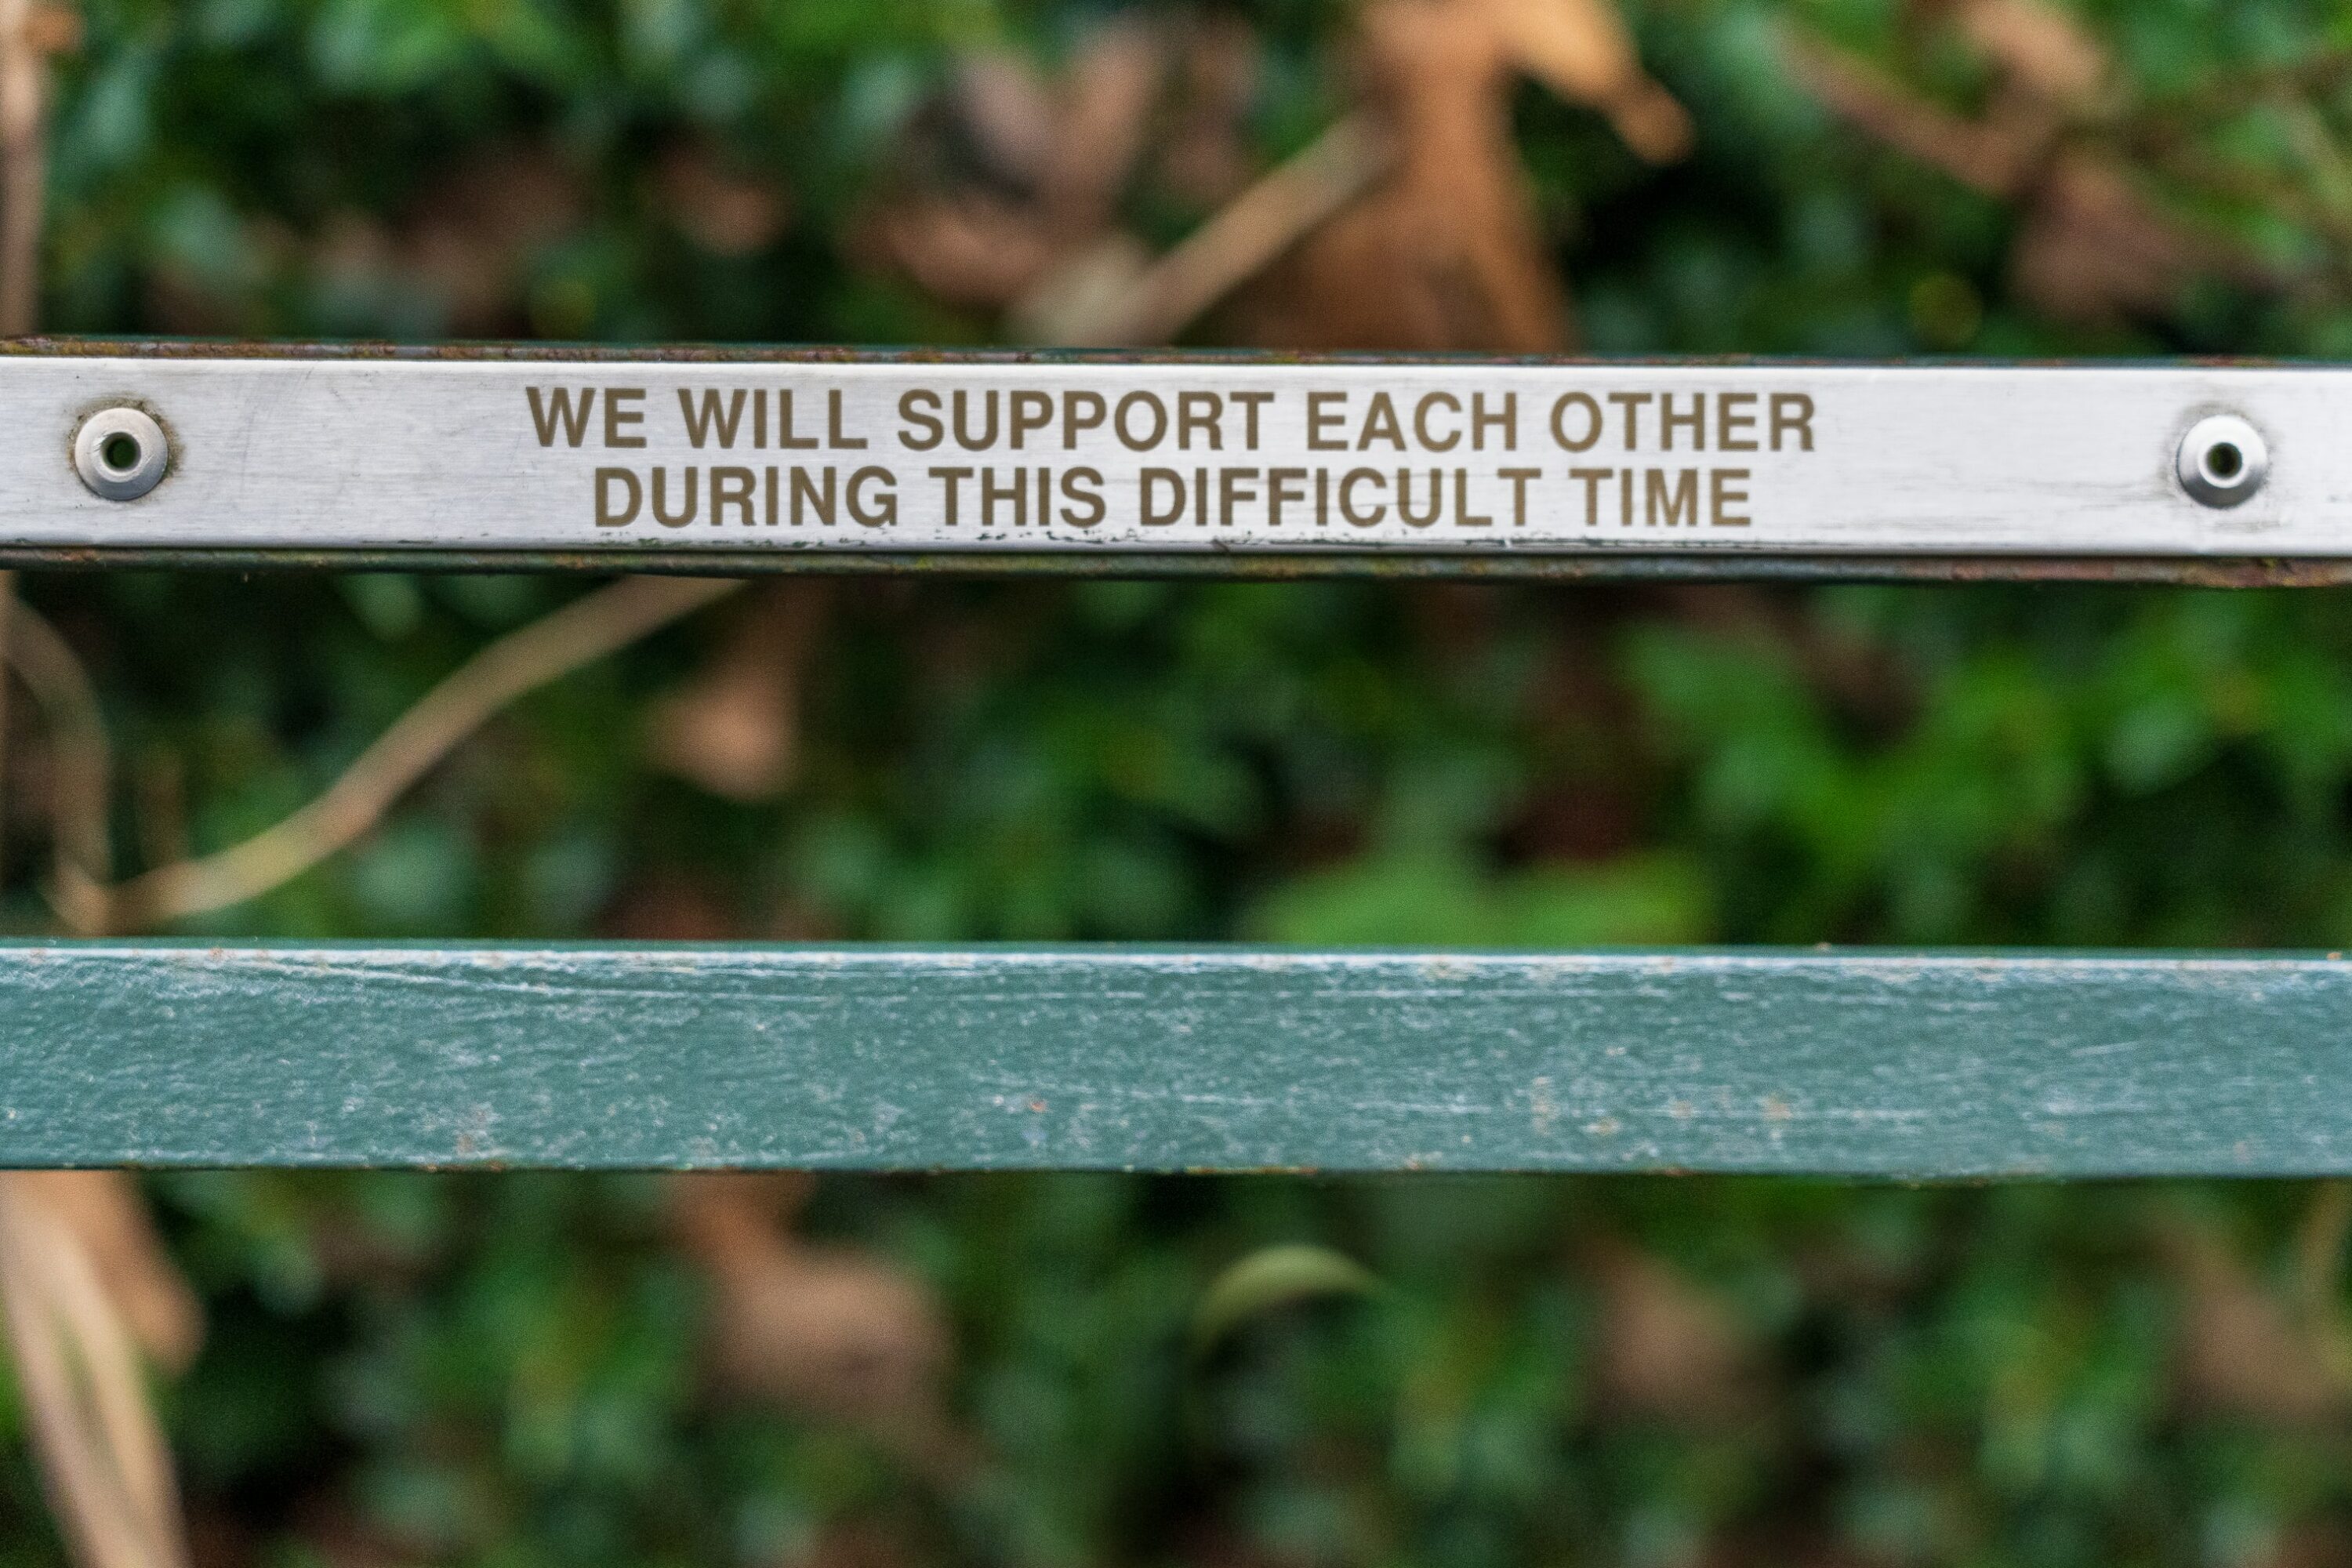 Photo of a wooden sign that says "We will support each other during this difficult time"